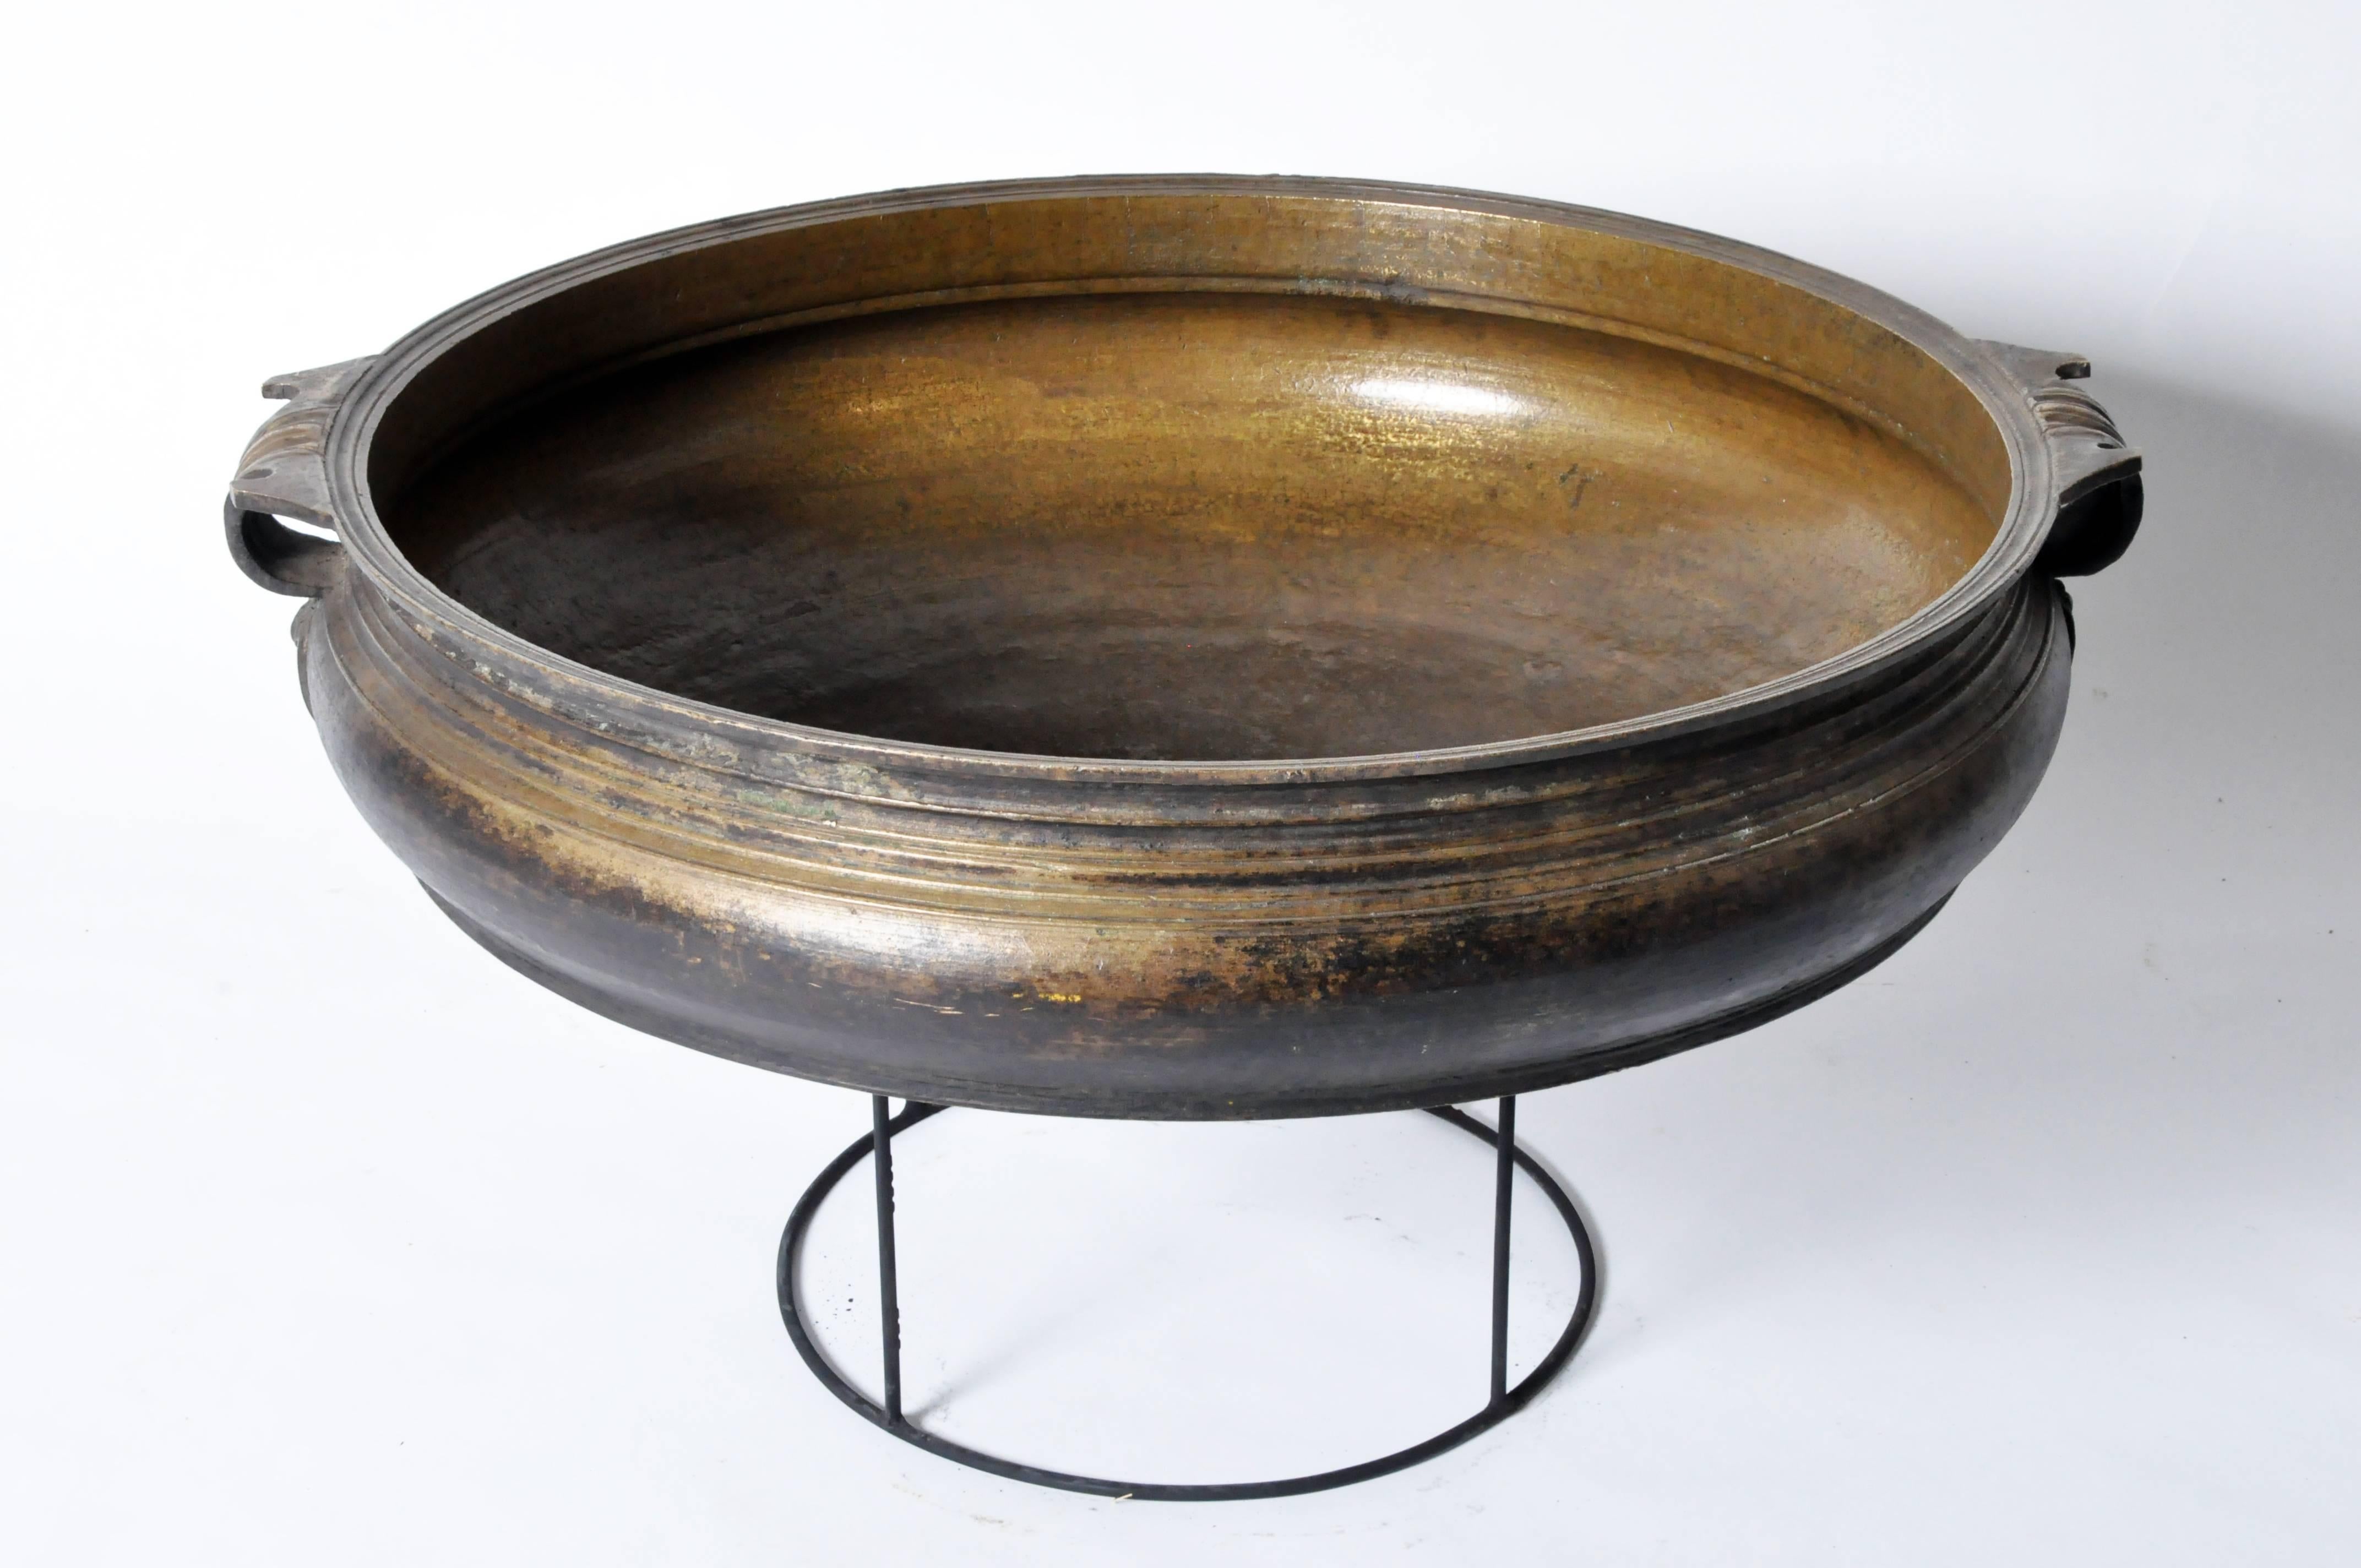 Raised on a newly made custom metal Stand, this large bowl-like censer has a banded decoration throughout the body and along the rim. The two loop handles with talon shaped decoration terminate in cordiform plates. Traditionally made for cooking, it